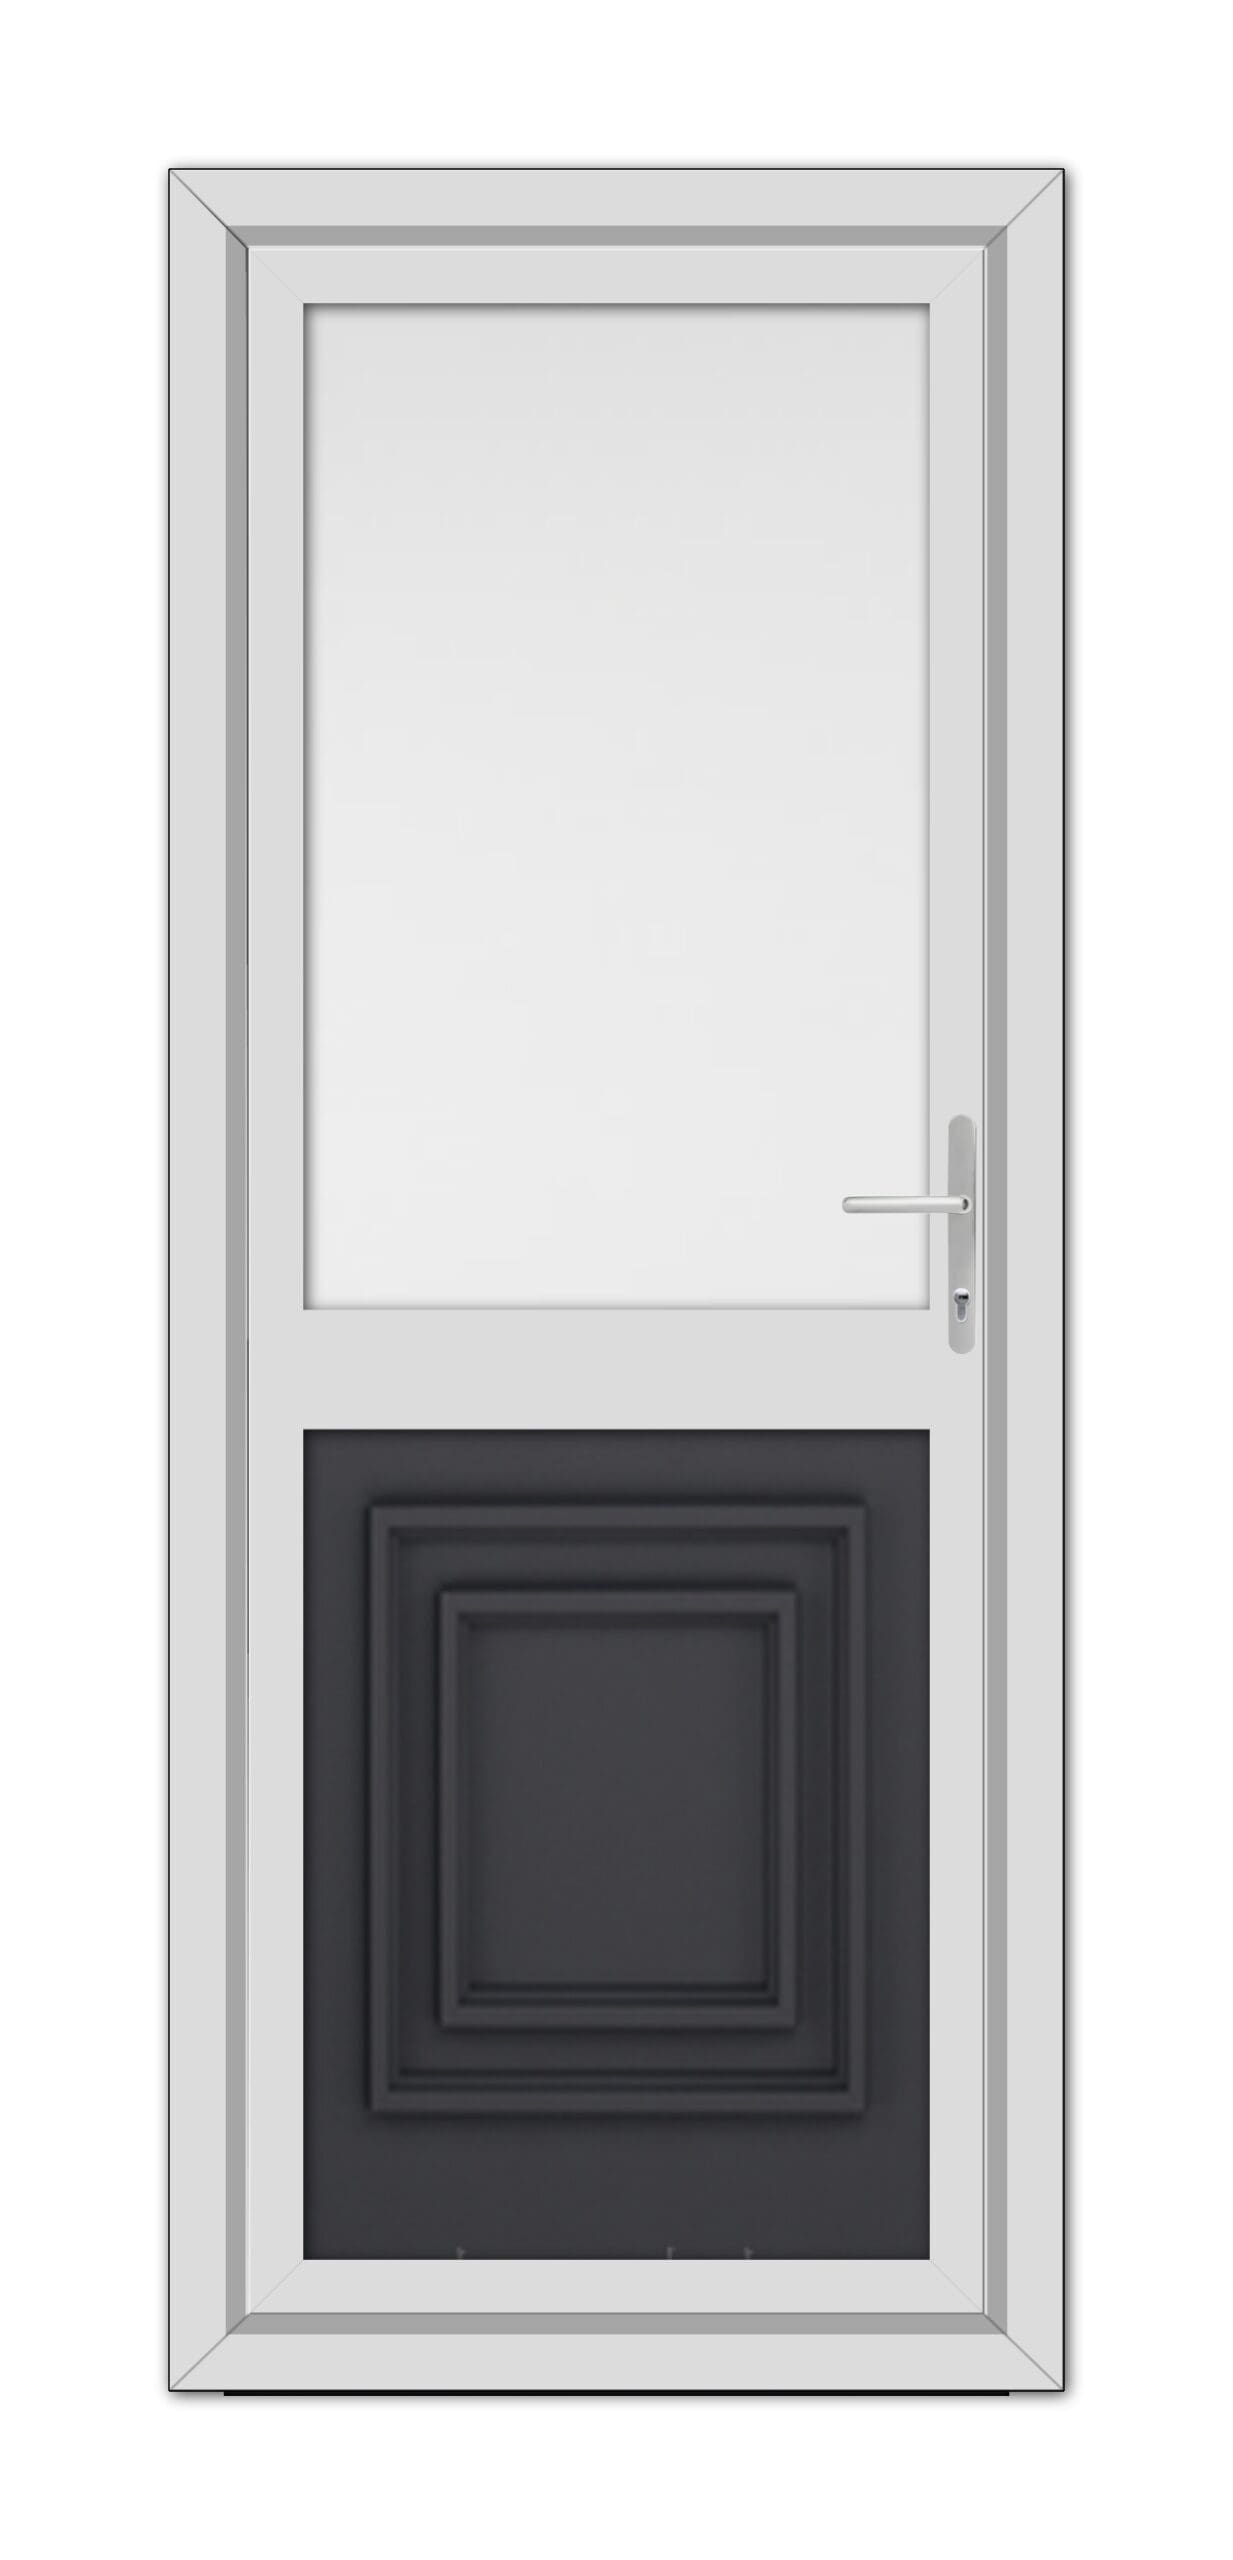 A modern white door with a silver handle and a Grey Hannover Half uPVC panel near the bottom, featuring a small window on the upper half.